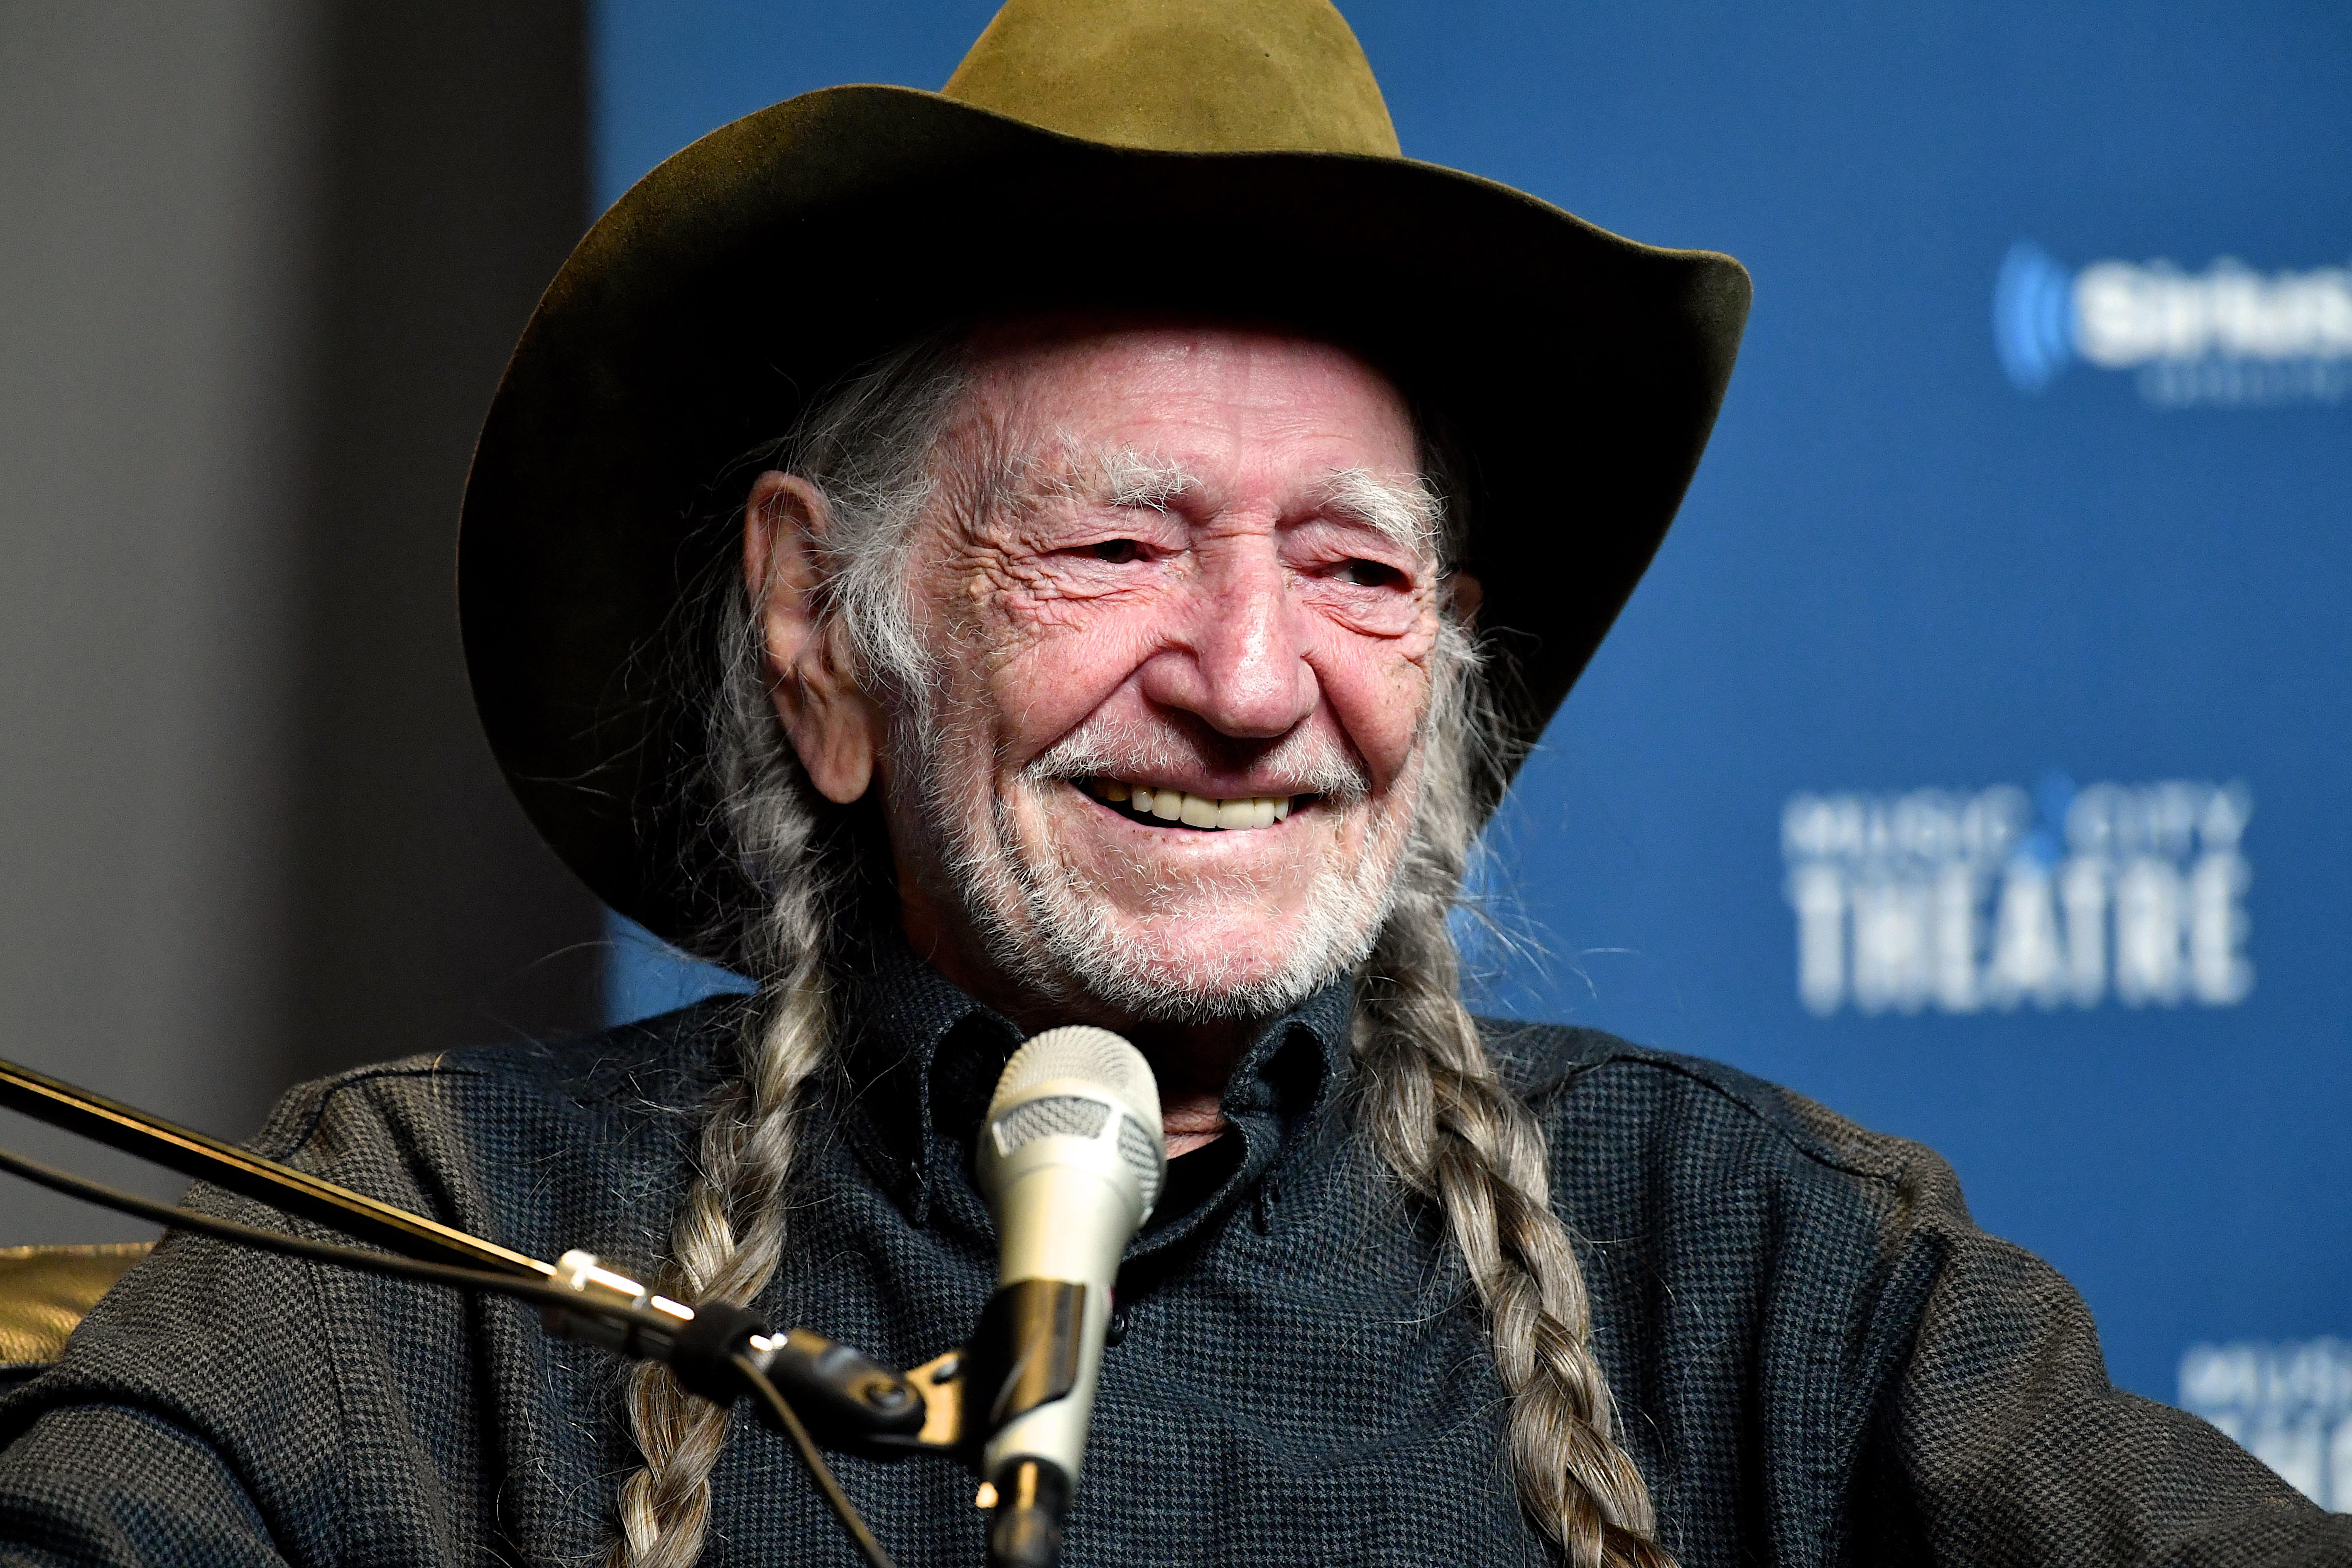 Willie Nelson says he cut Utah show short because of altitude - CBS News